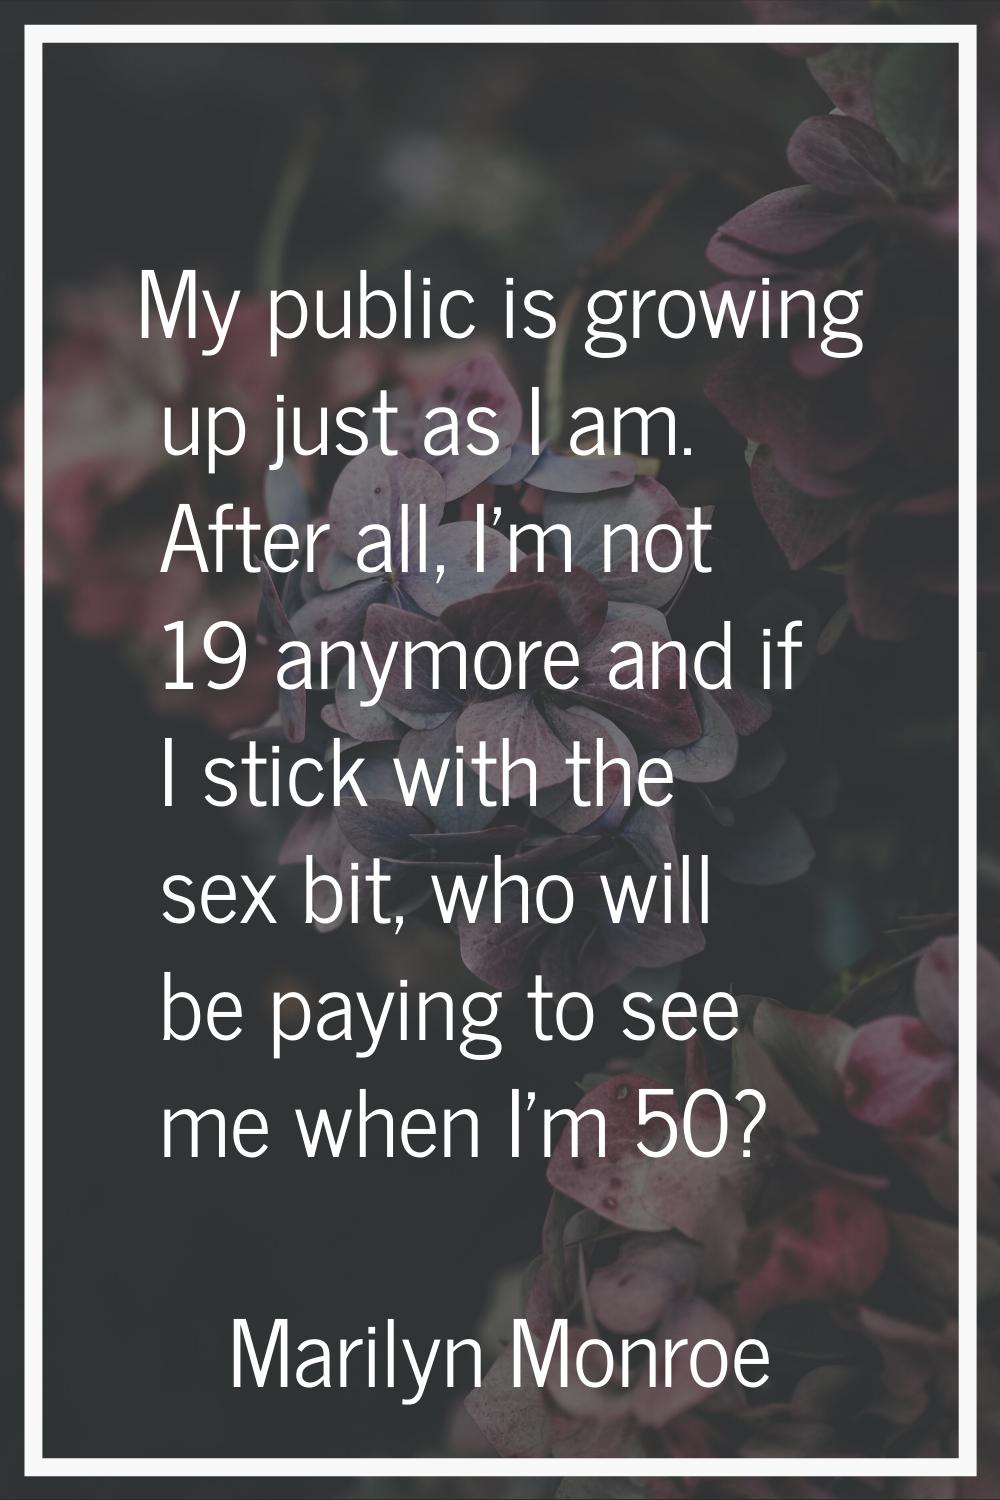 My public is growing up just as I am. After all, I'm not 19 anymore and if I stick with the sex bit